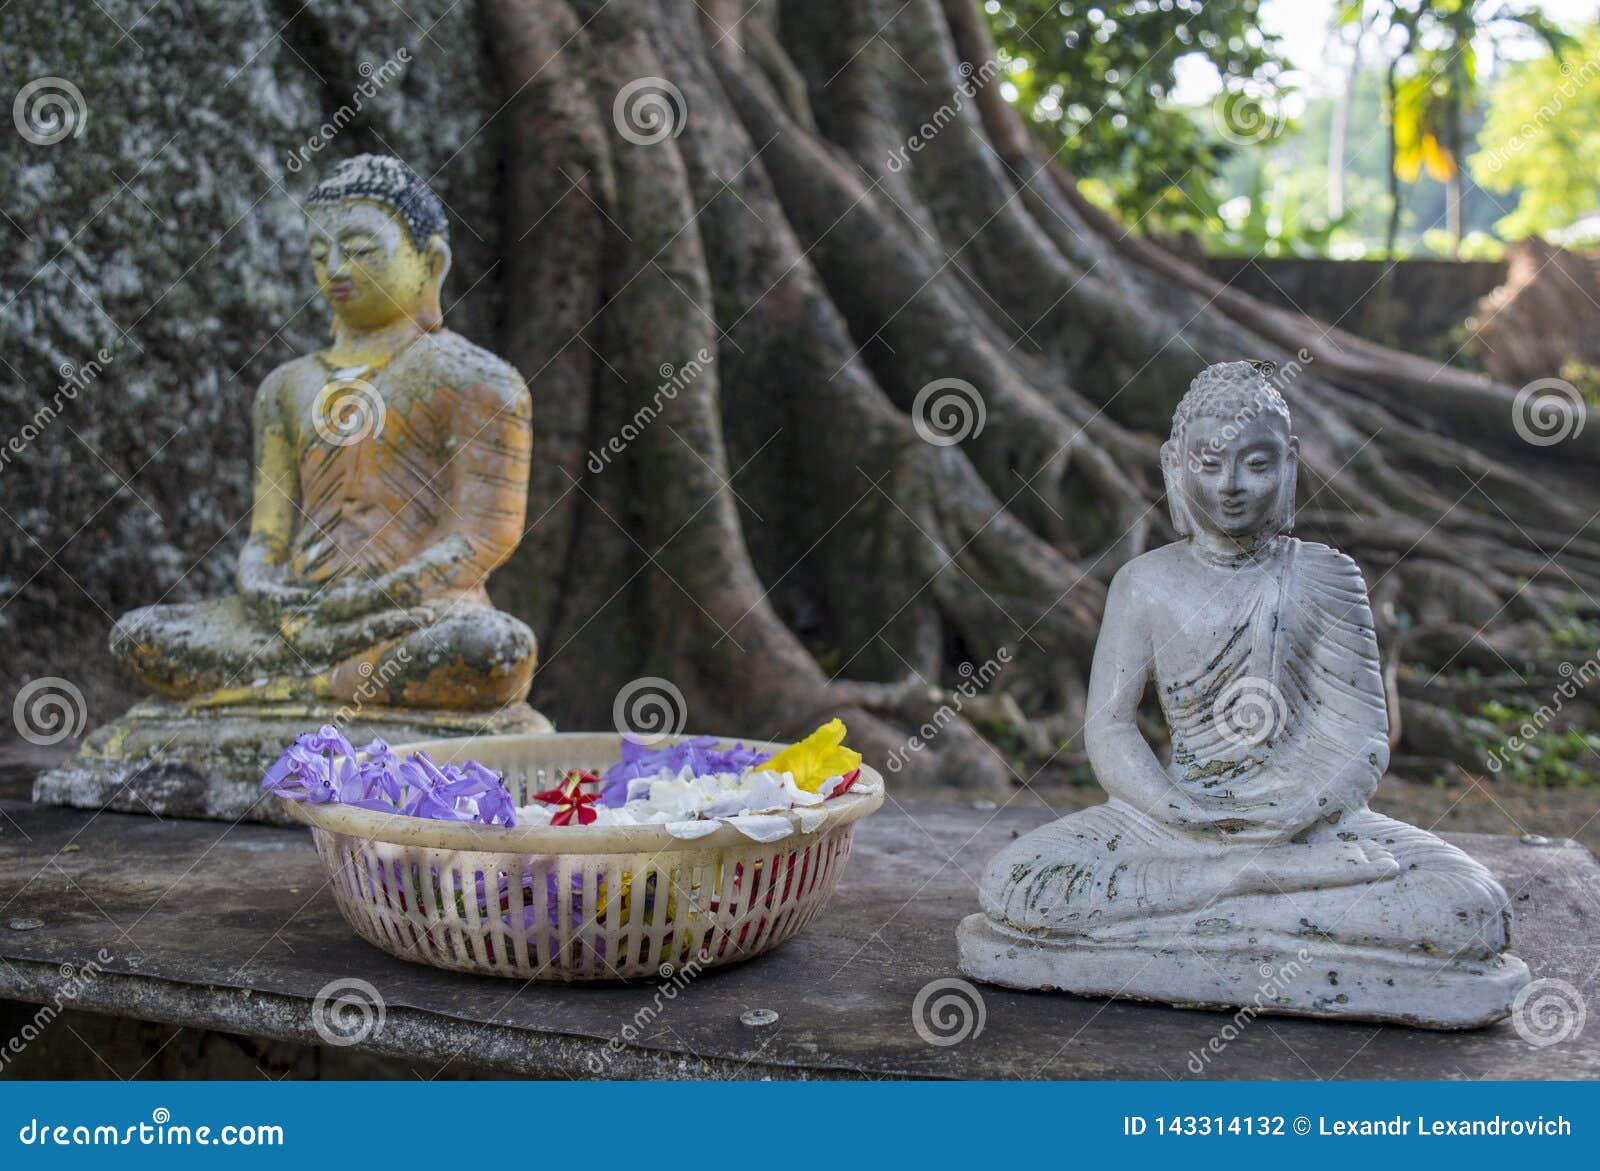 Image result for buddha in a basket